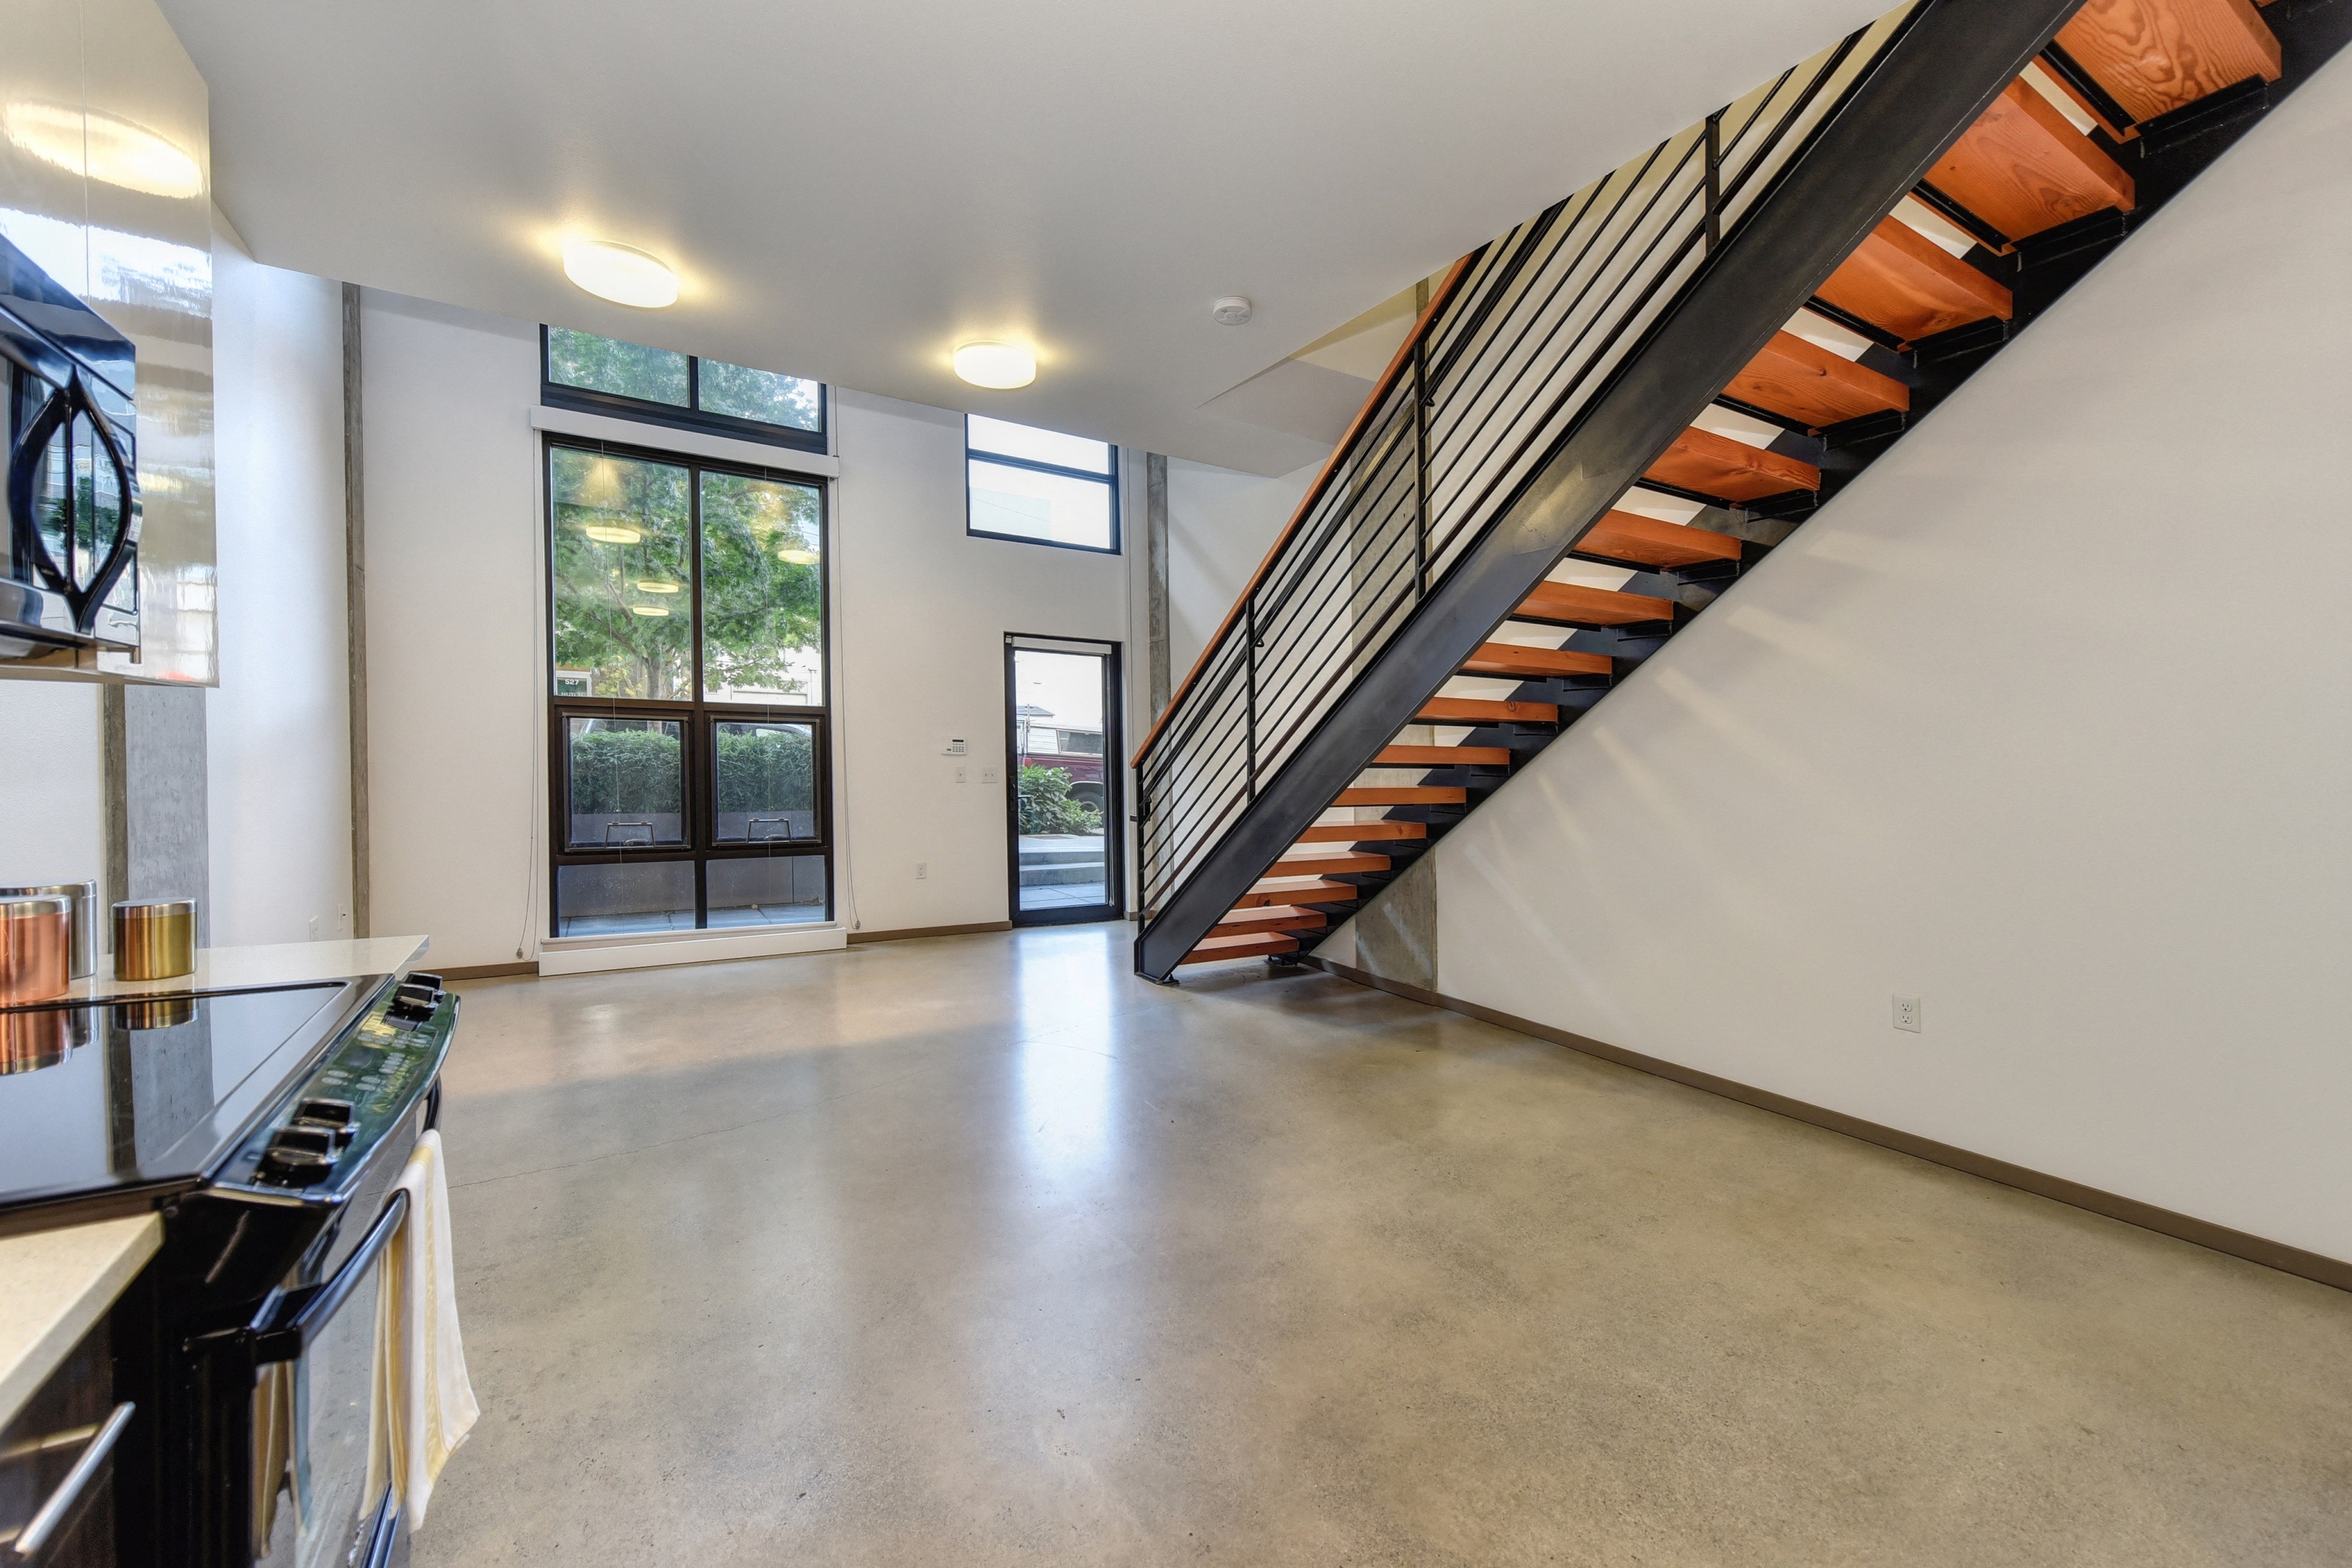 Staircase in Townhome with Side View of Oven, Windows and Solid Floor